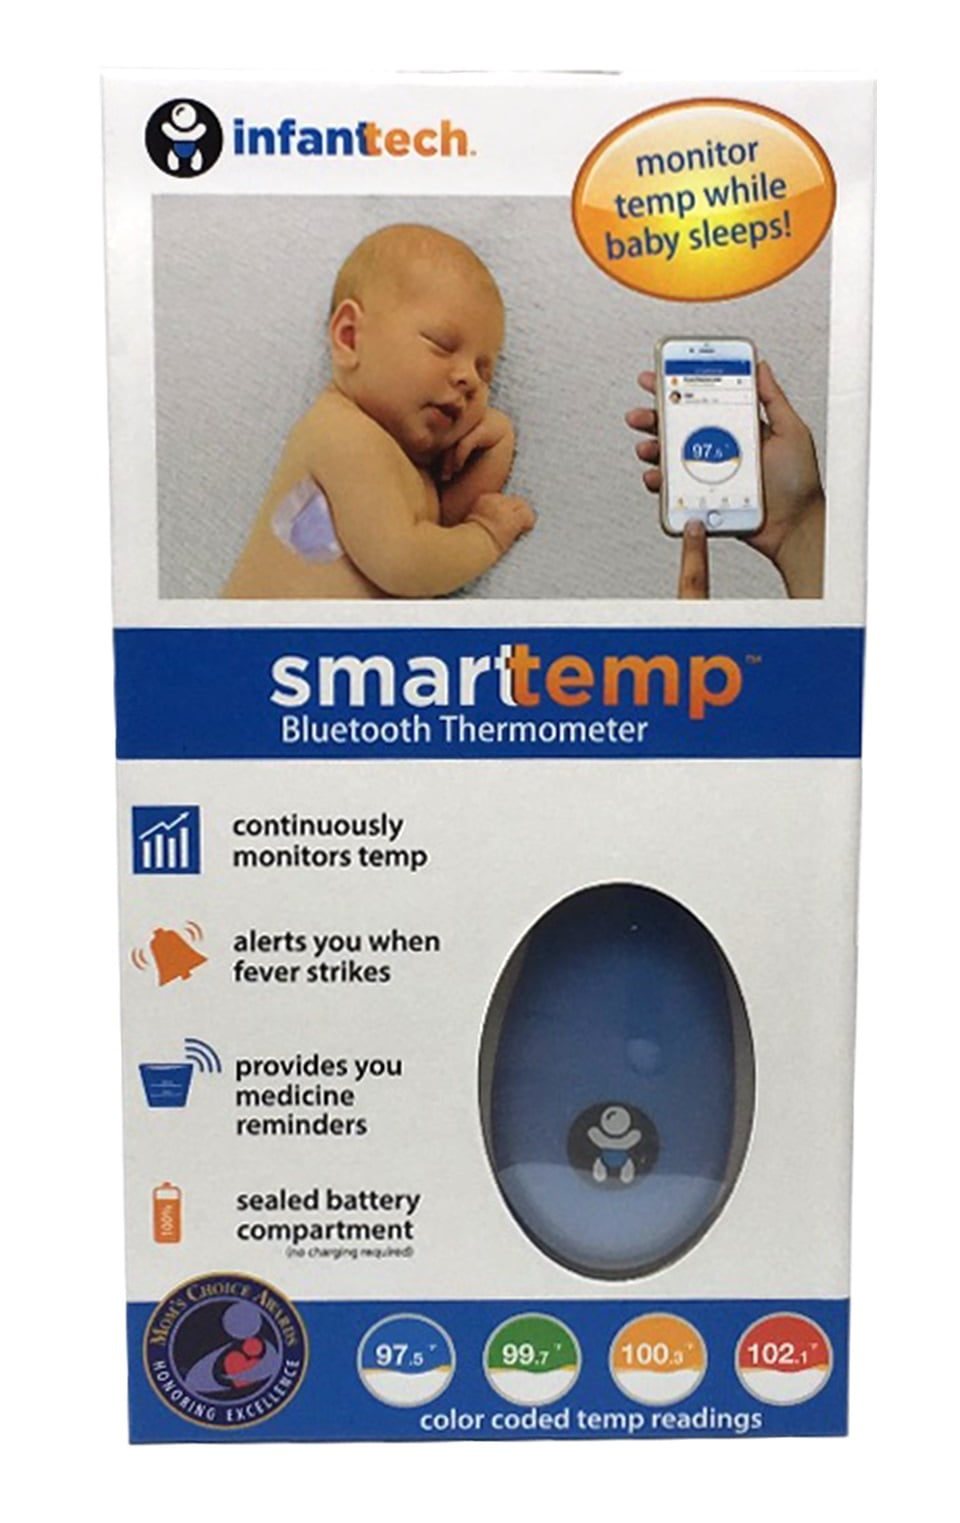 TD-1035 Wearable Thermometer (For Children) – SmartOptz